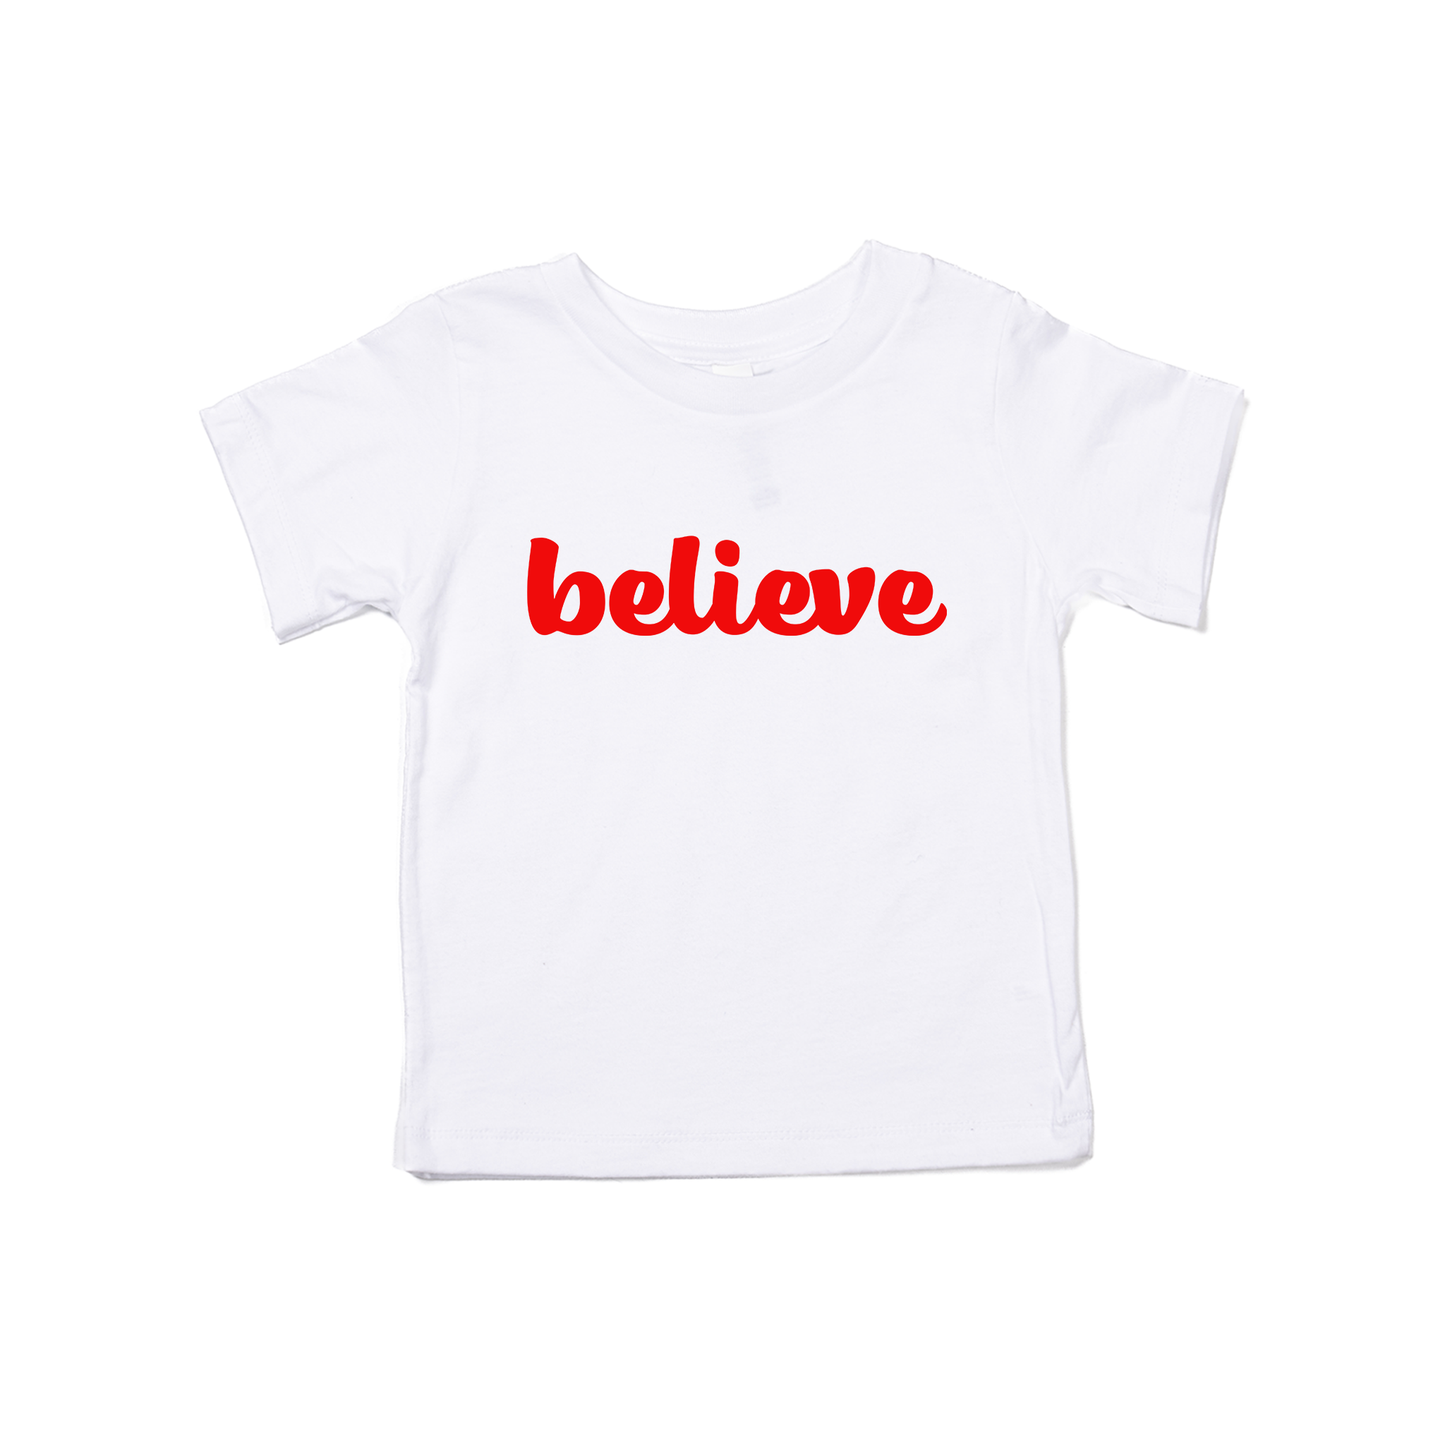 Believe (Thick Cursive, Red) - Kids Tee (White)